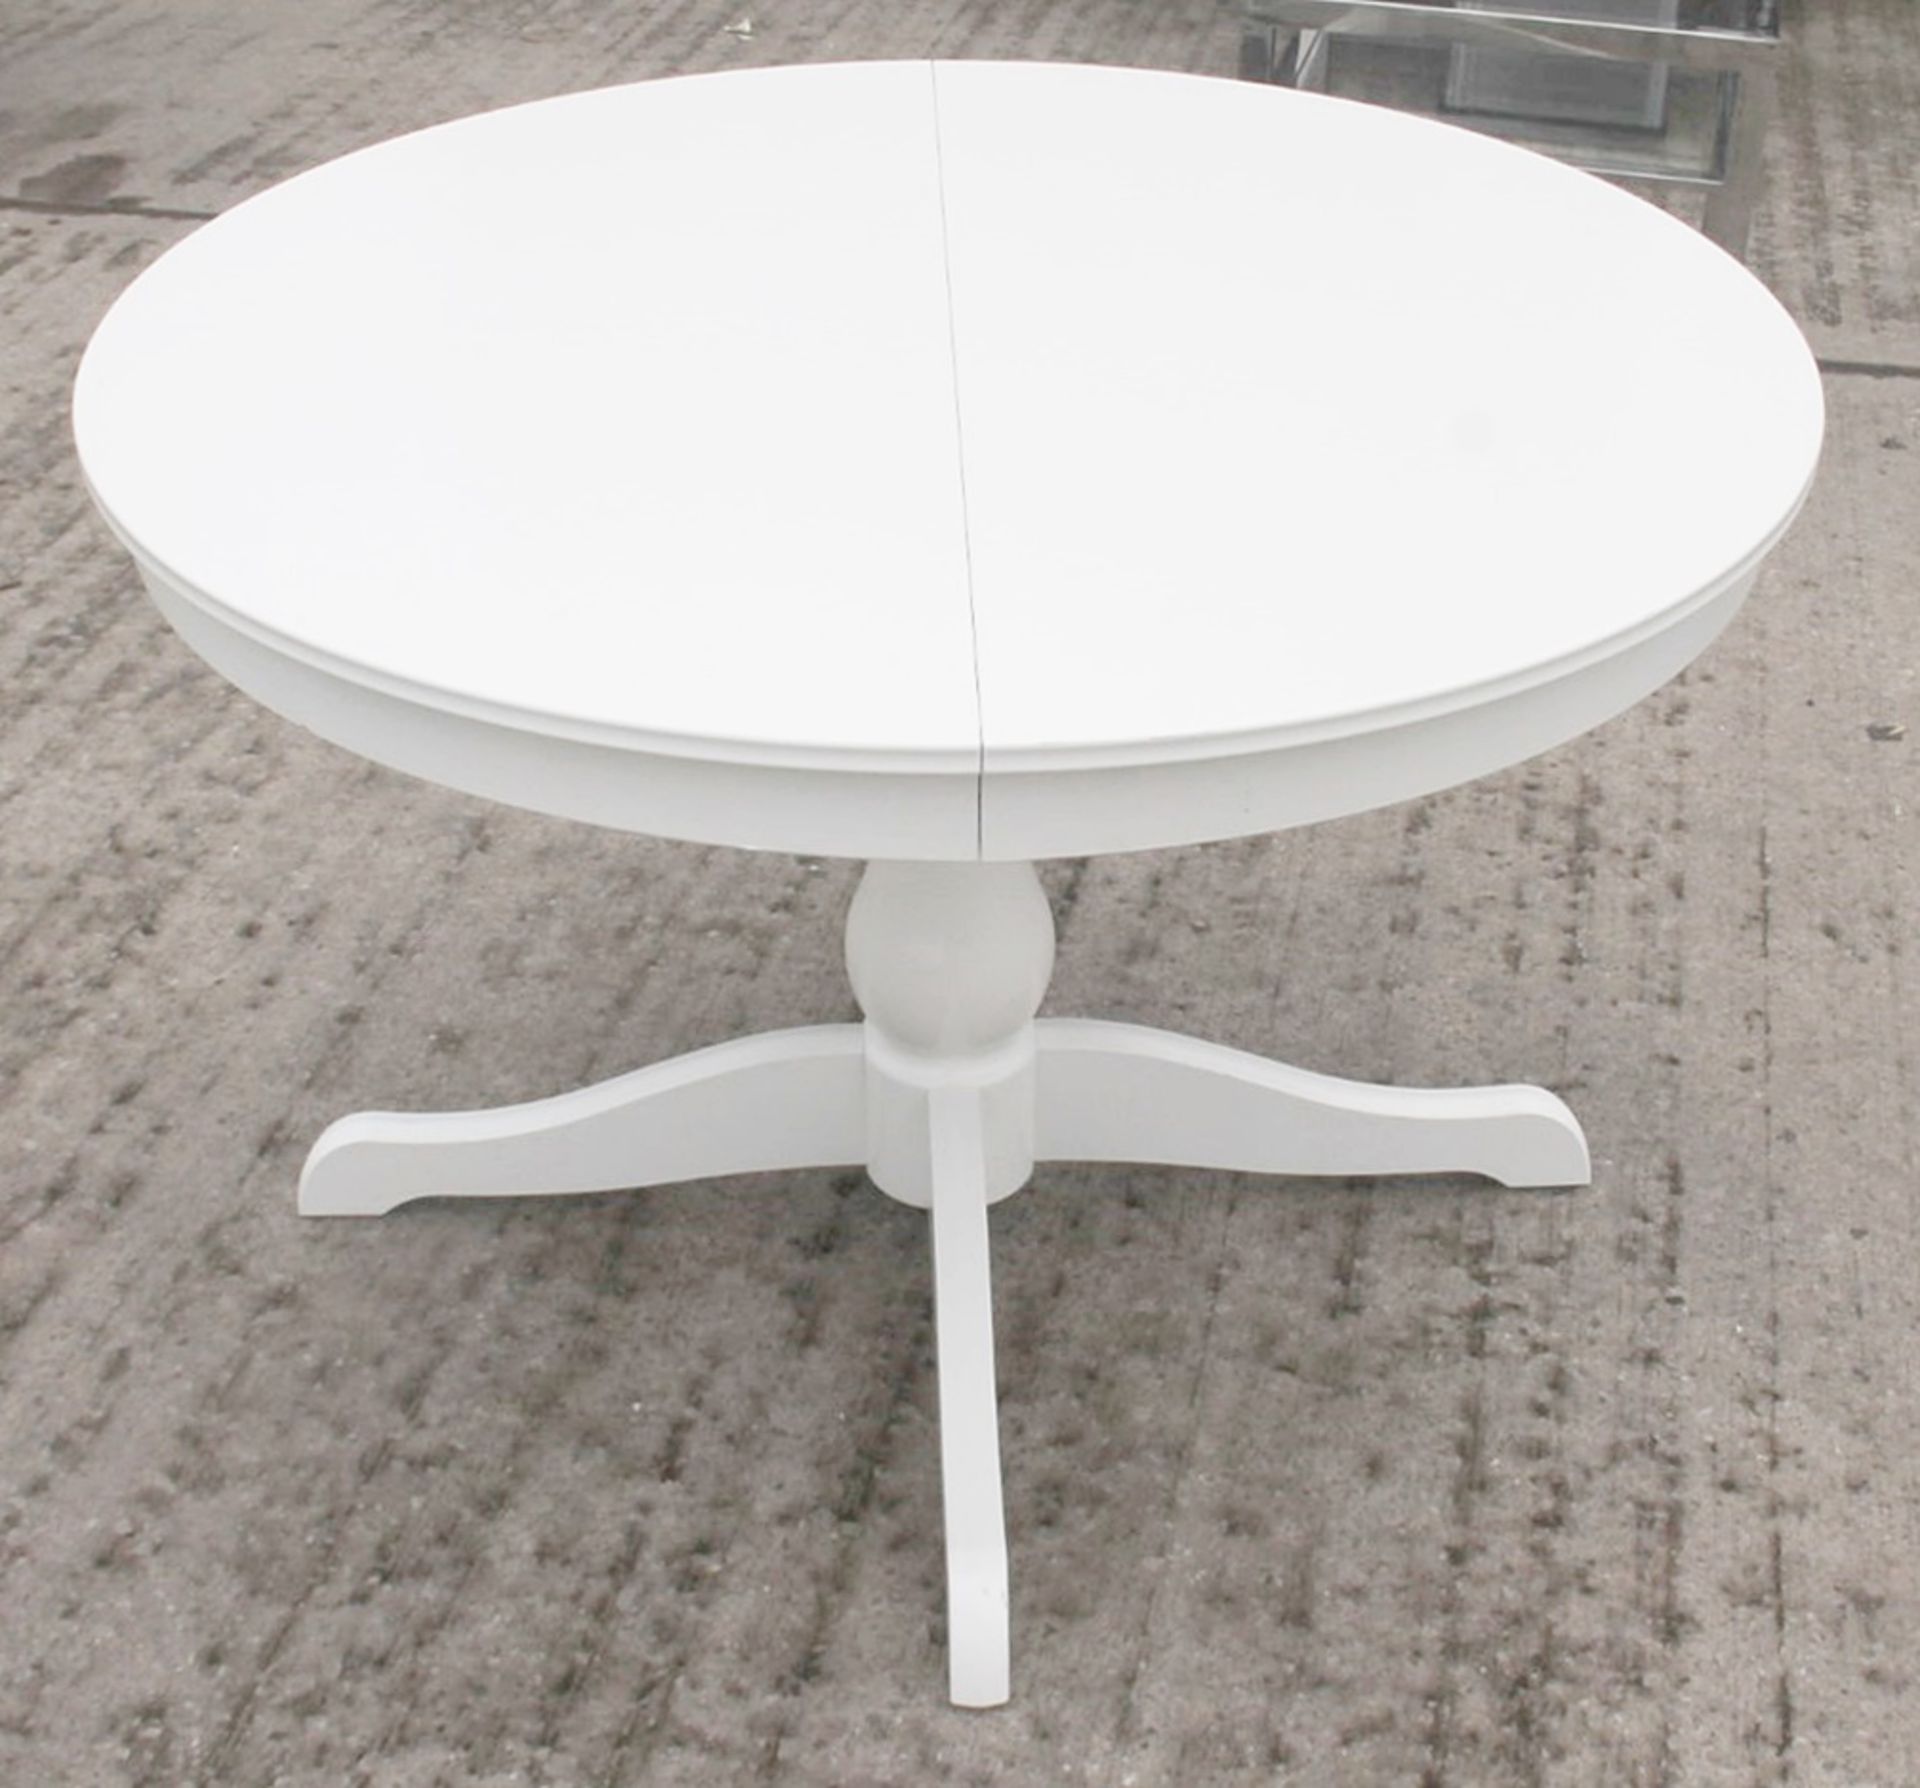 1 x Round Extending Wooden Table In White - Recently Relocated From An Exclusive Property - Ref: - Image 4 of 5